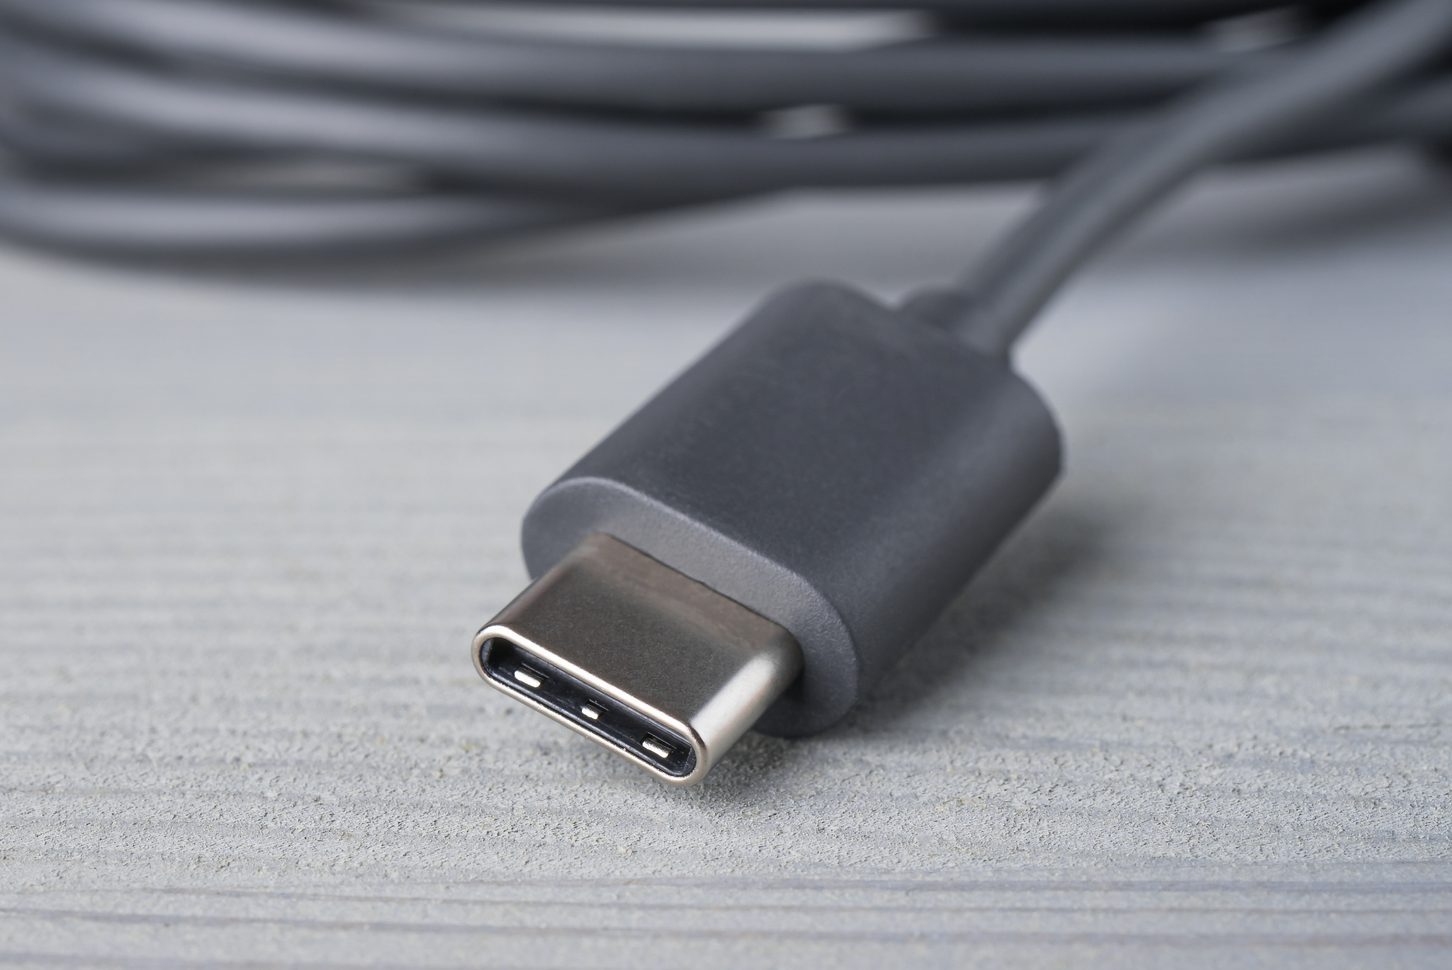 USB Type C connector with a grey cable.